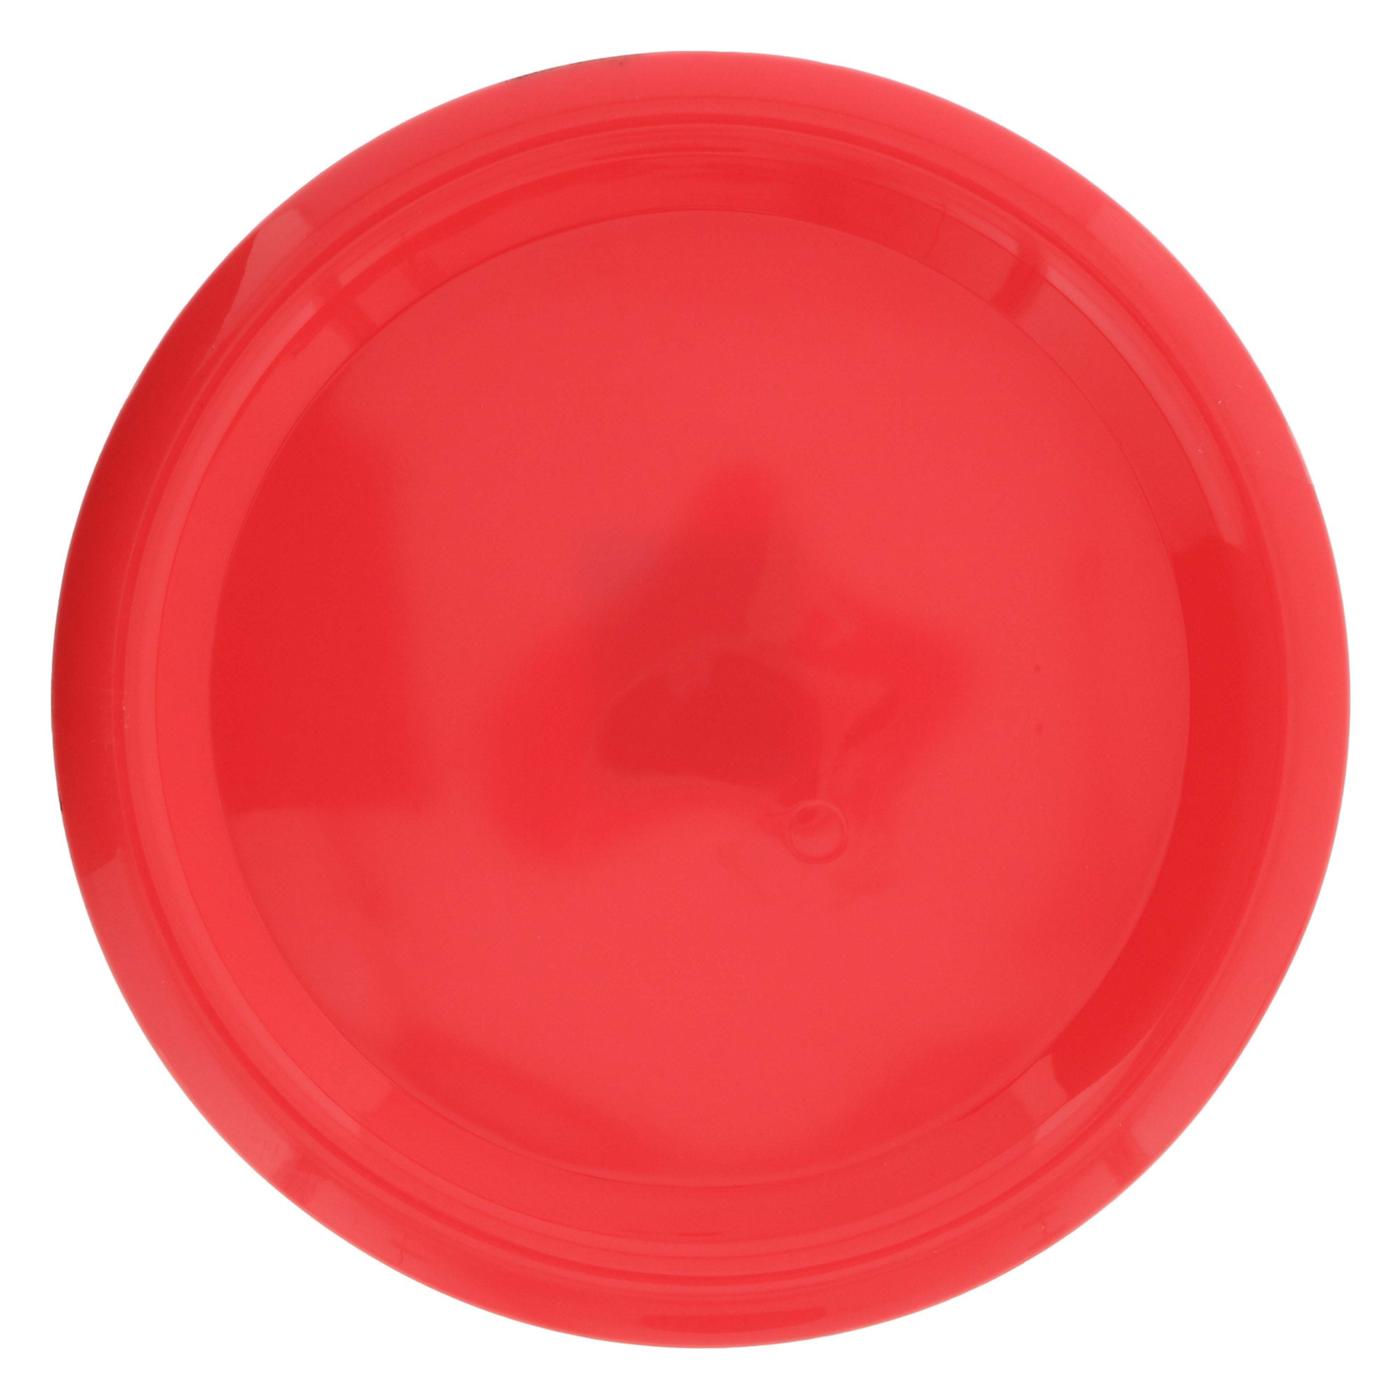 Dining Style Summer Value Plate 4 pk; image 2 of 2